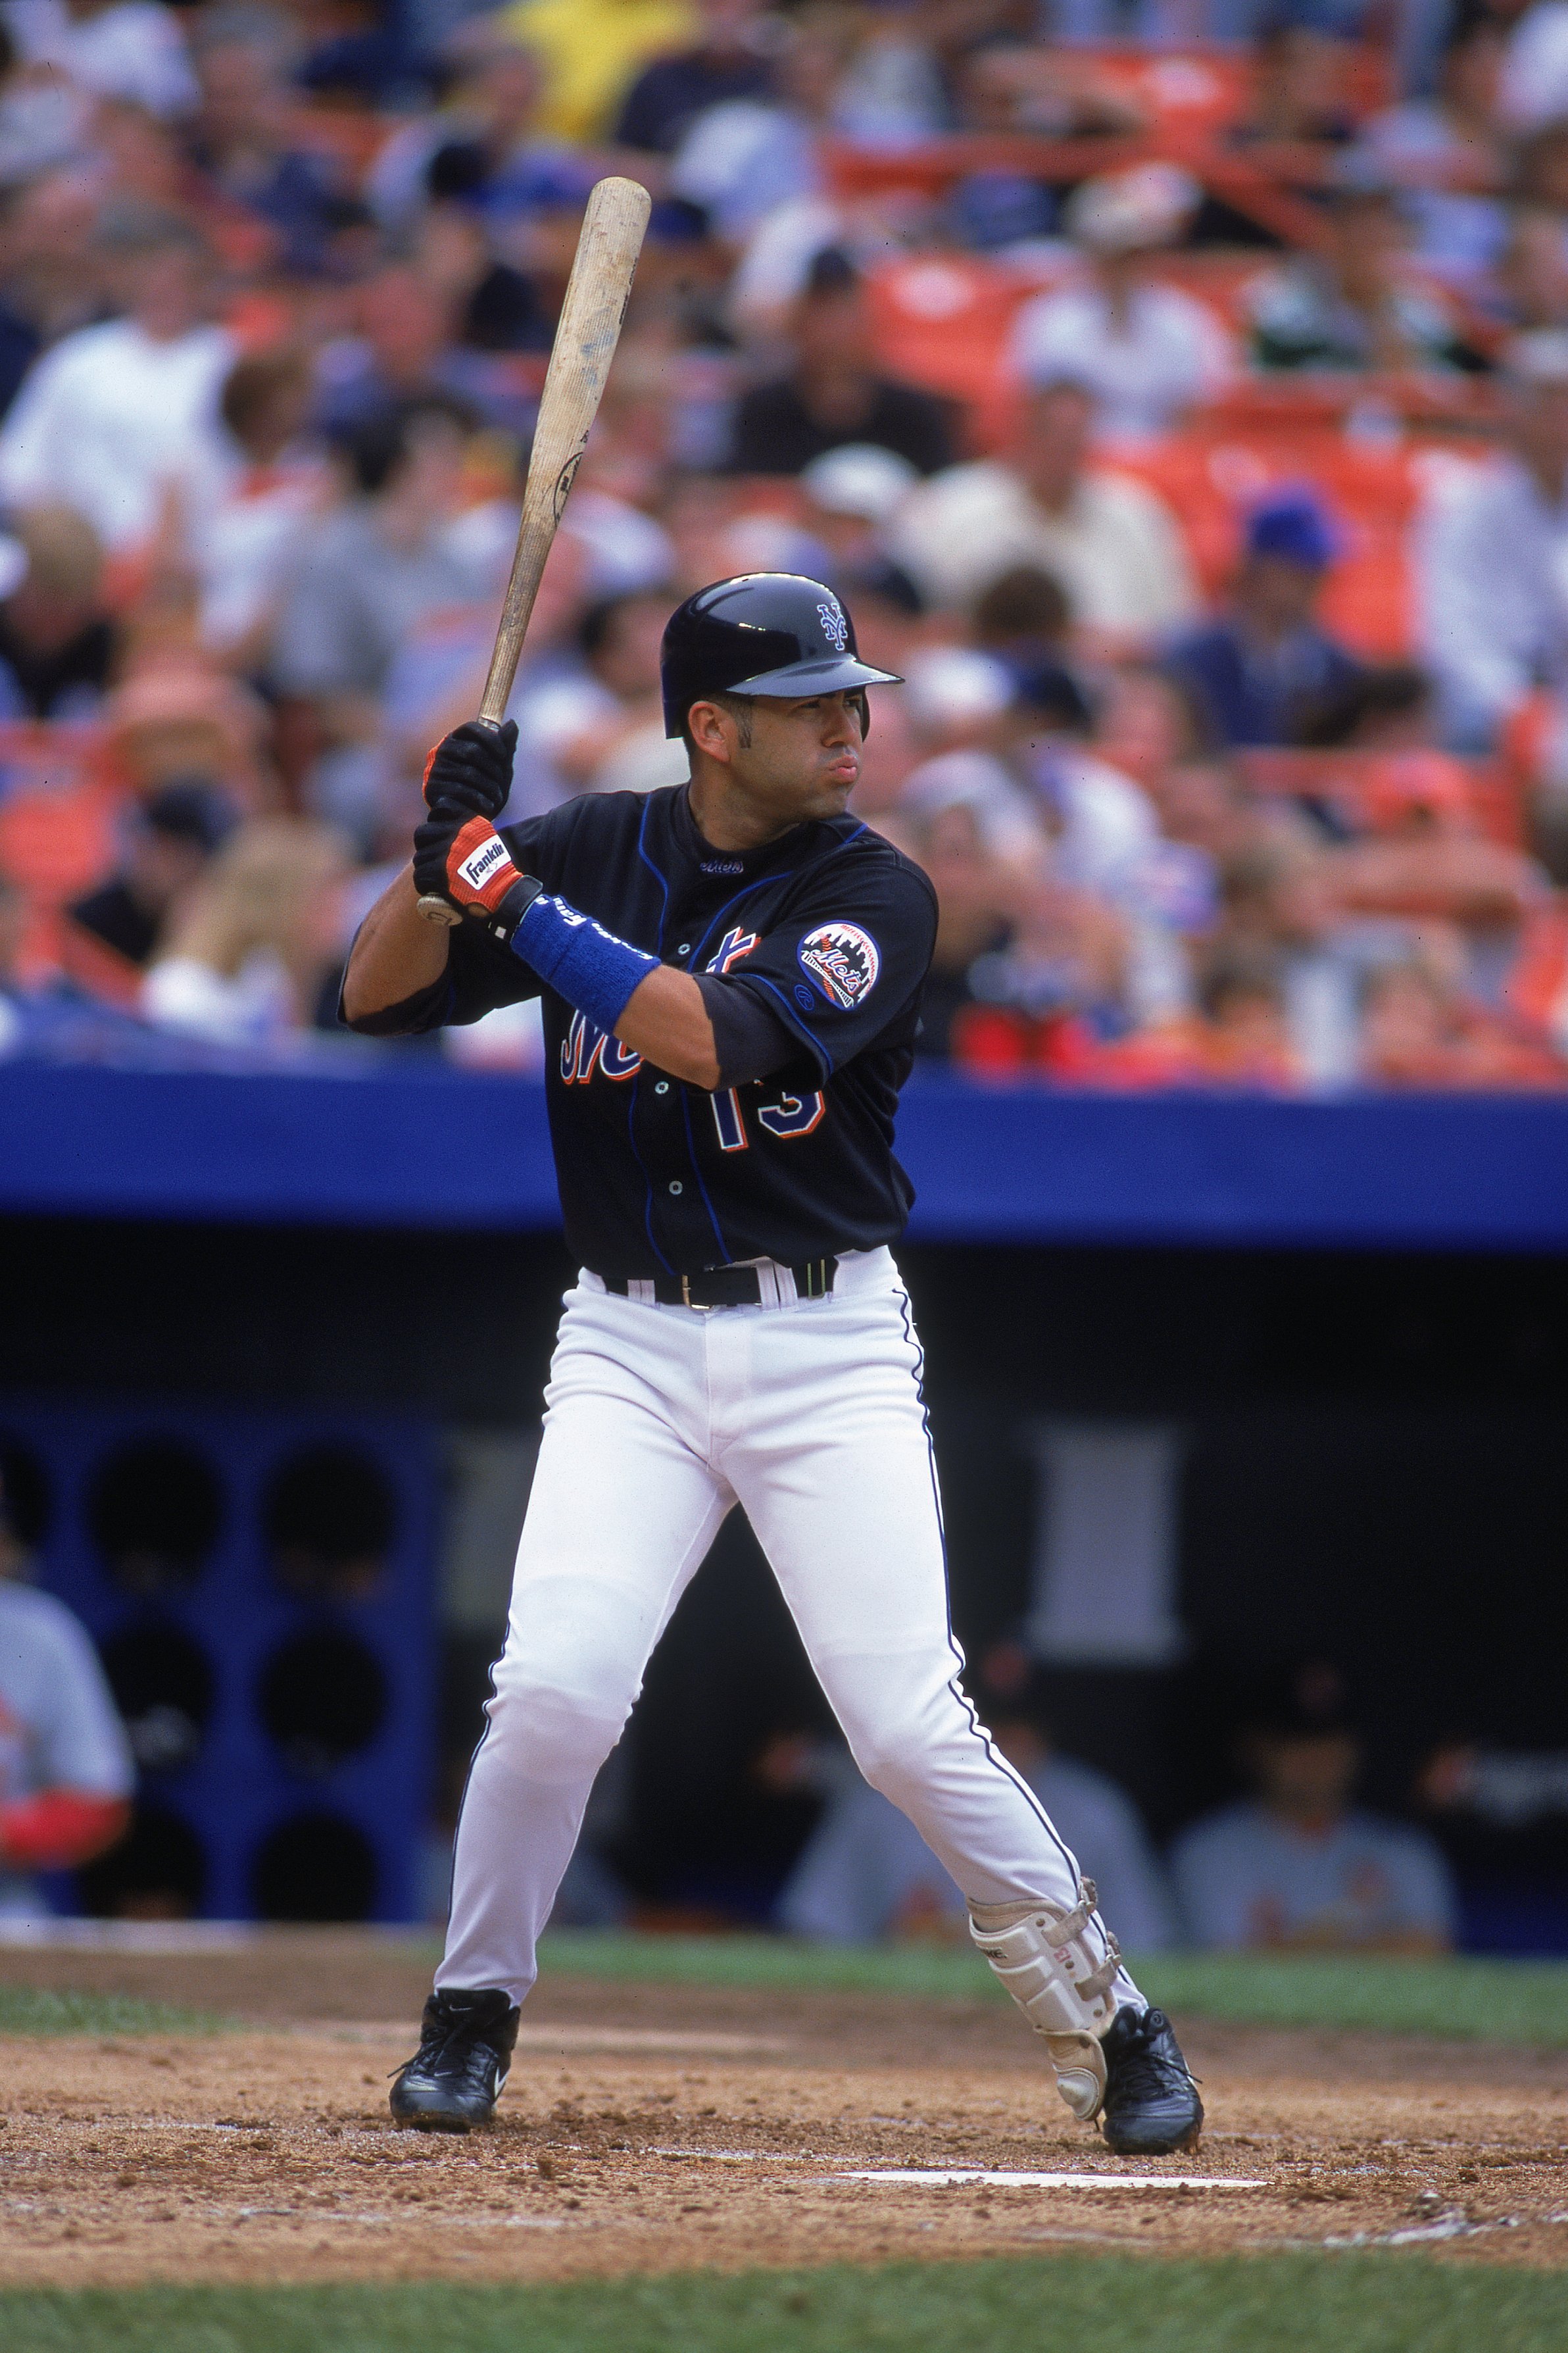 31 Jul 2000:  Edgardo Alfonzo #13 of the New York Mets at bat in the infield during the game against the St. Louis Cardinals at Shea Stadium in Flushing, New York. The Mets defeated the Cardinals 4-2.Mandatory Credit: Al Bello  /Allsport